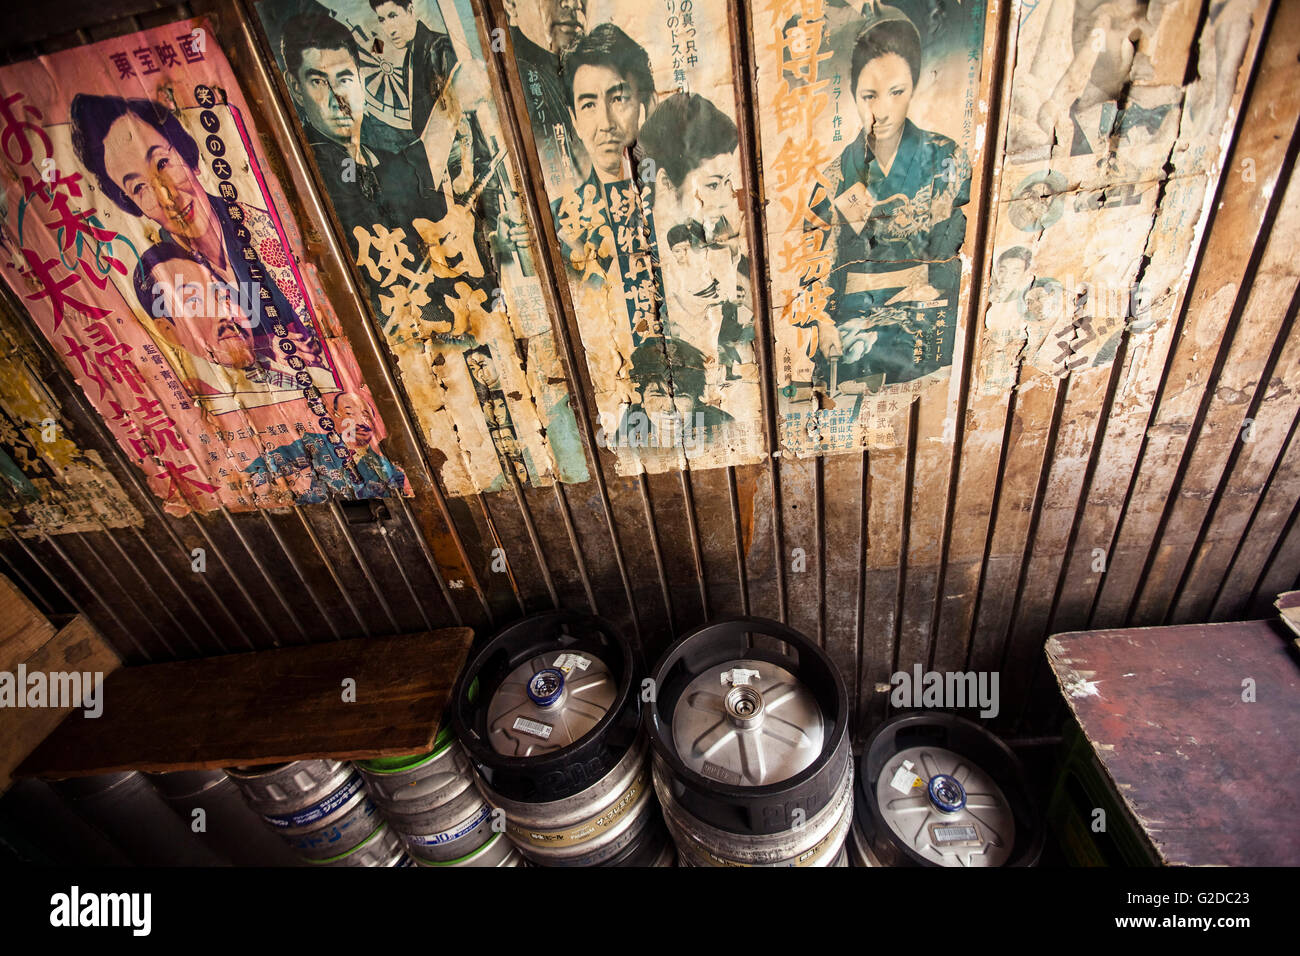 Old Posters and Advertisements With Kegs of Beer in Bar, Tokyo, Japan Stock Photo